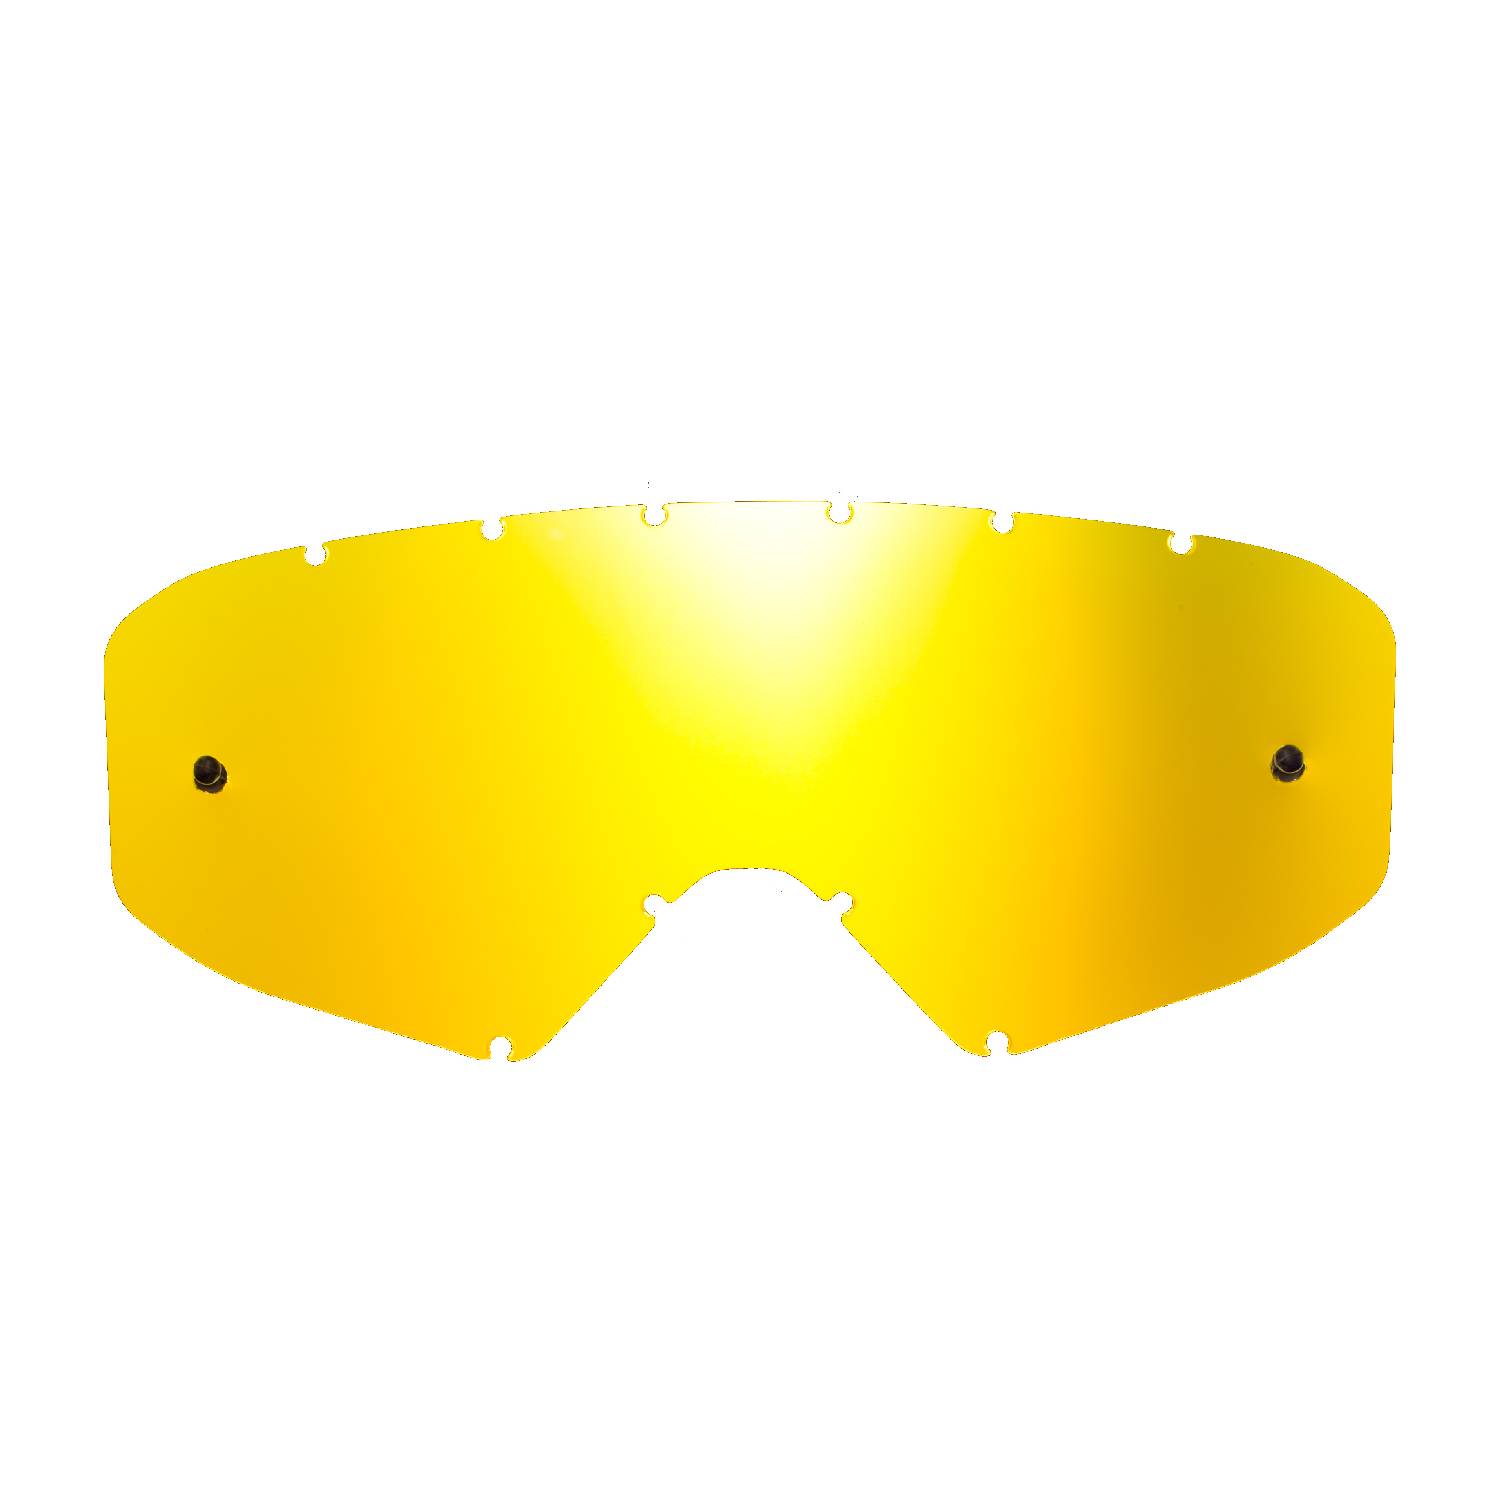 gold-toned mirrored replacement lens compatible for Ethen Zerocinque Primis / R / Ares / Ares Pluma cross goggles / goggles